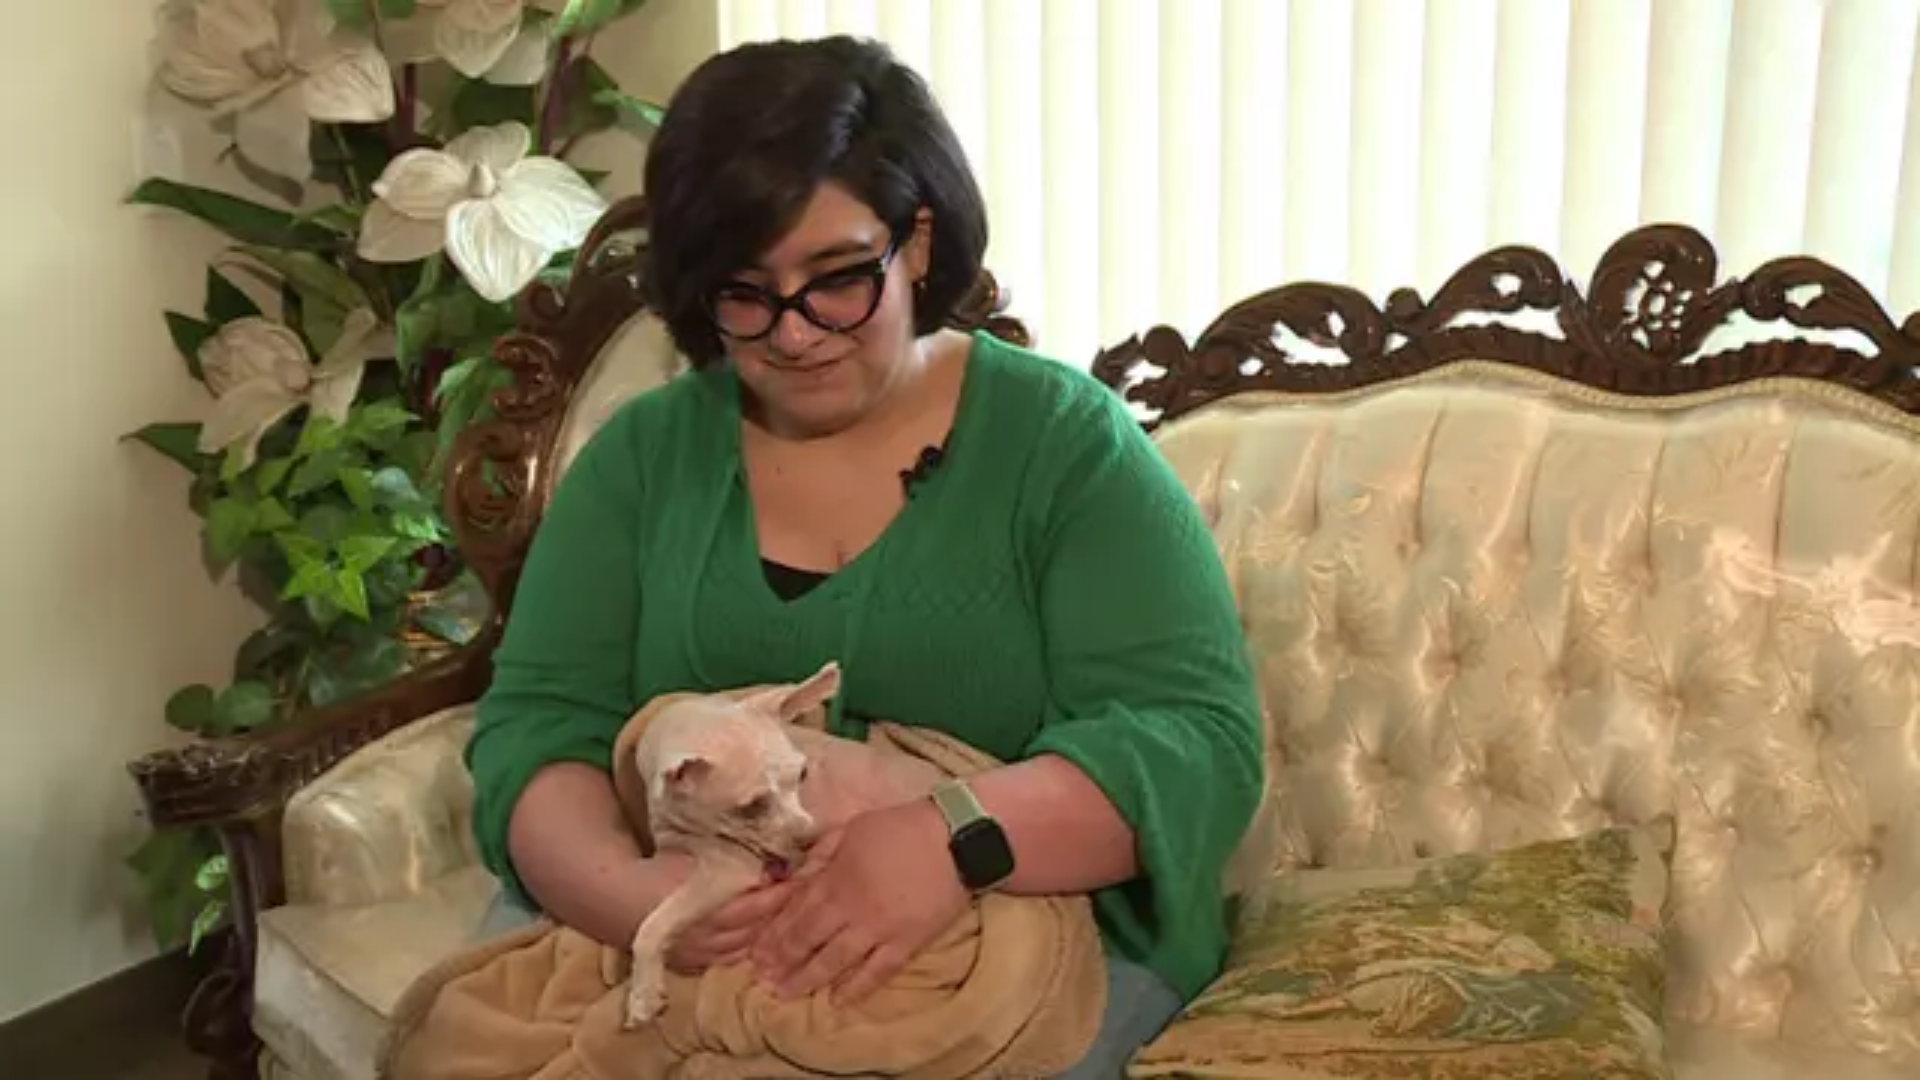 Woman Joyfully Reunites With Lost Dog After 9 Years Of Search